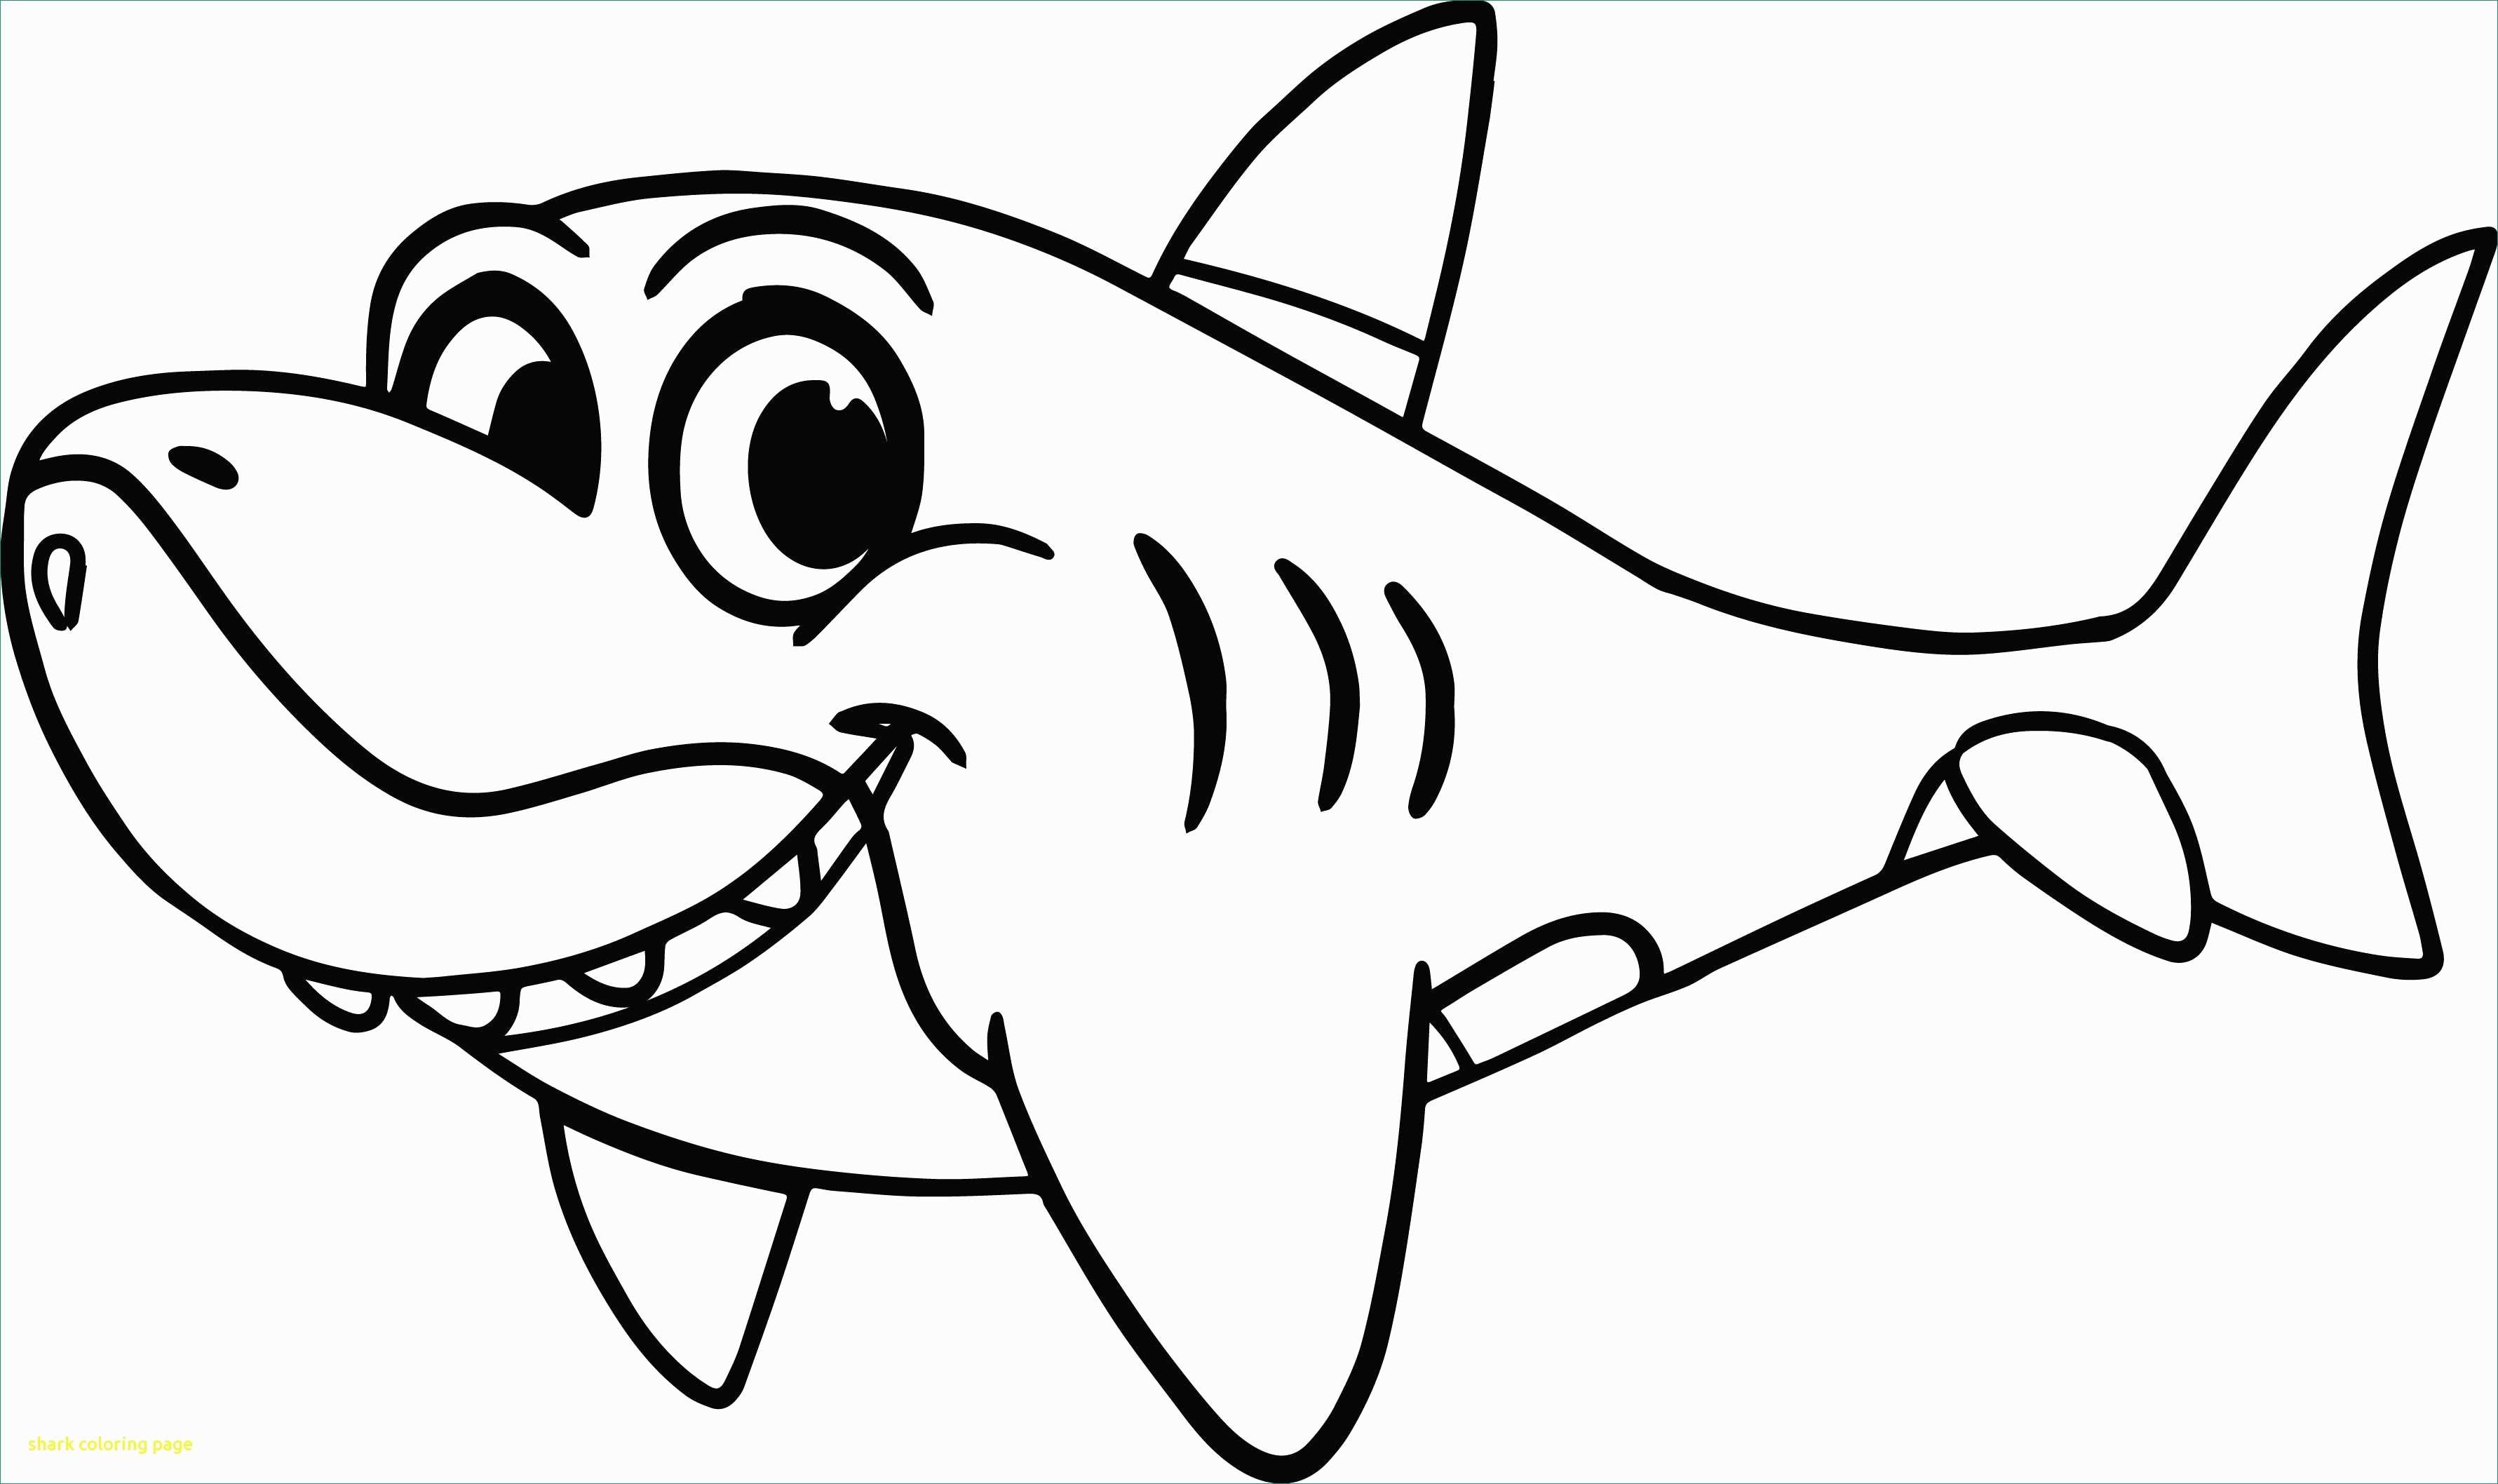 shark-drawing-template-at-paintingvalley-explore-collection-of